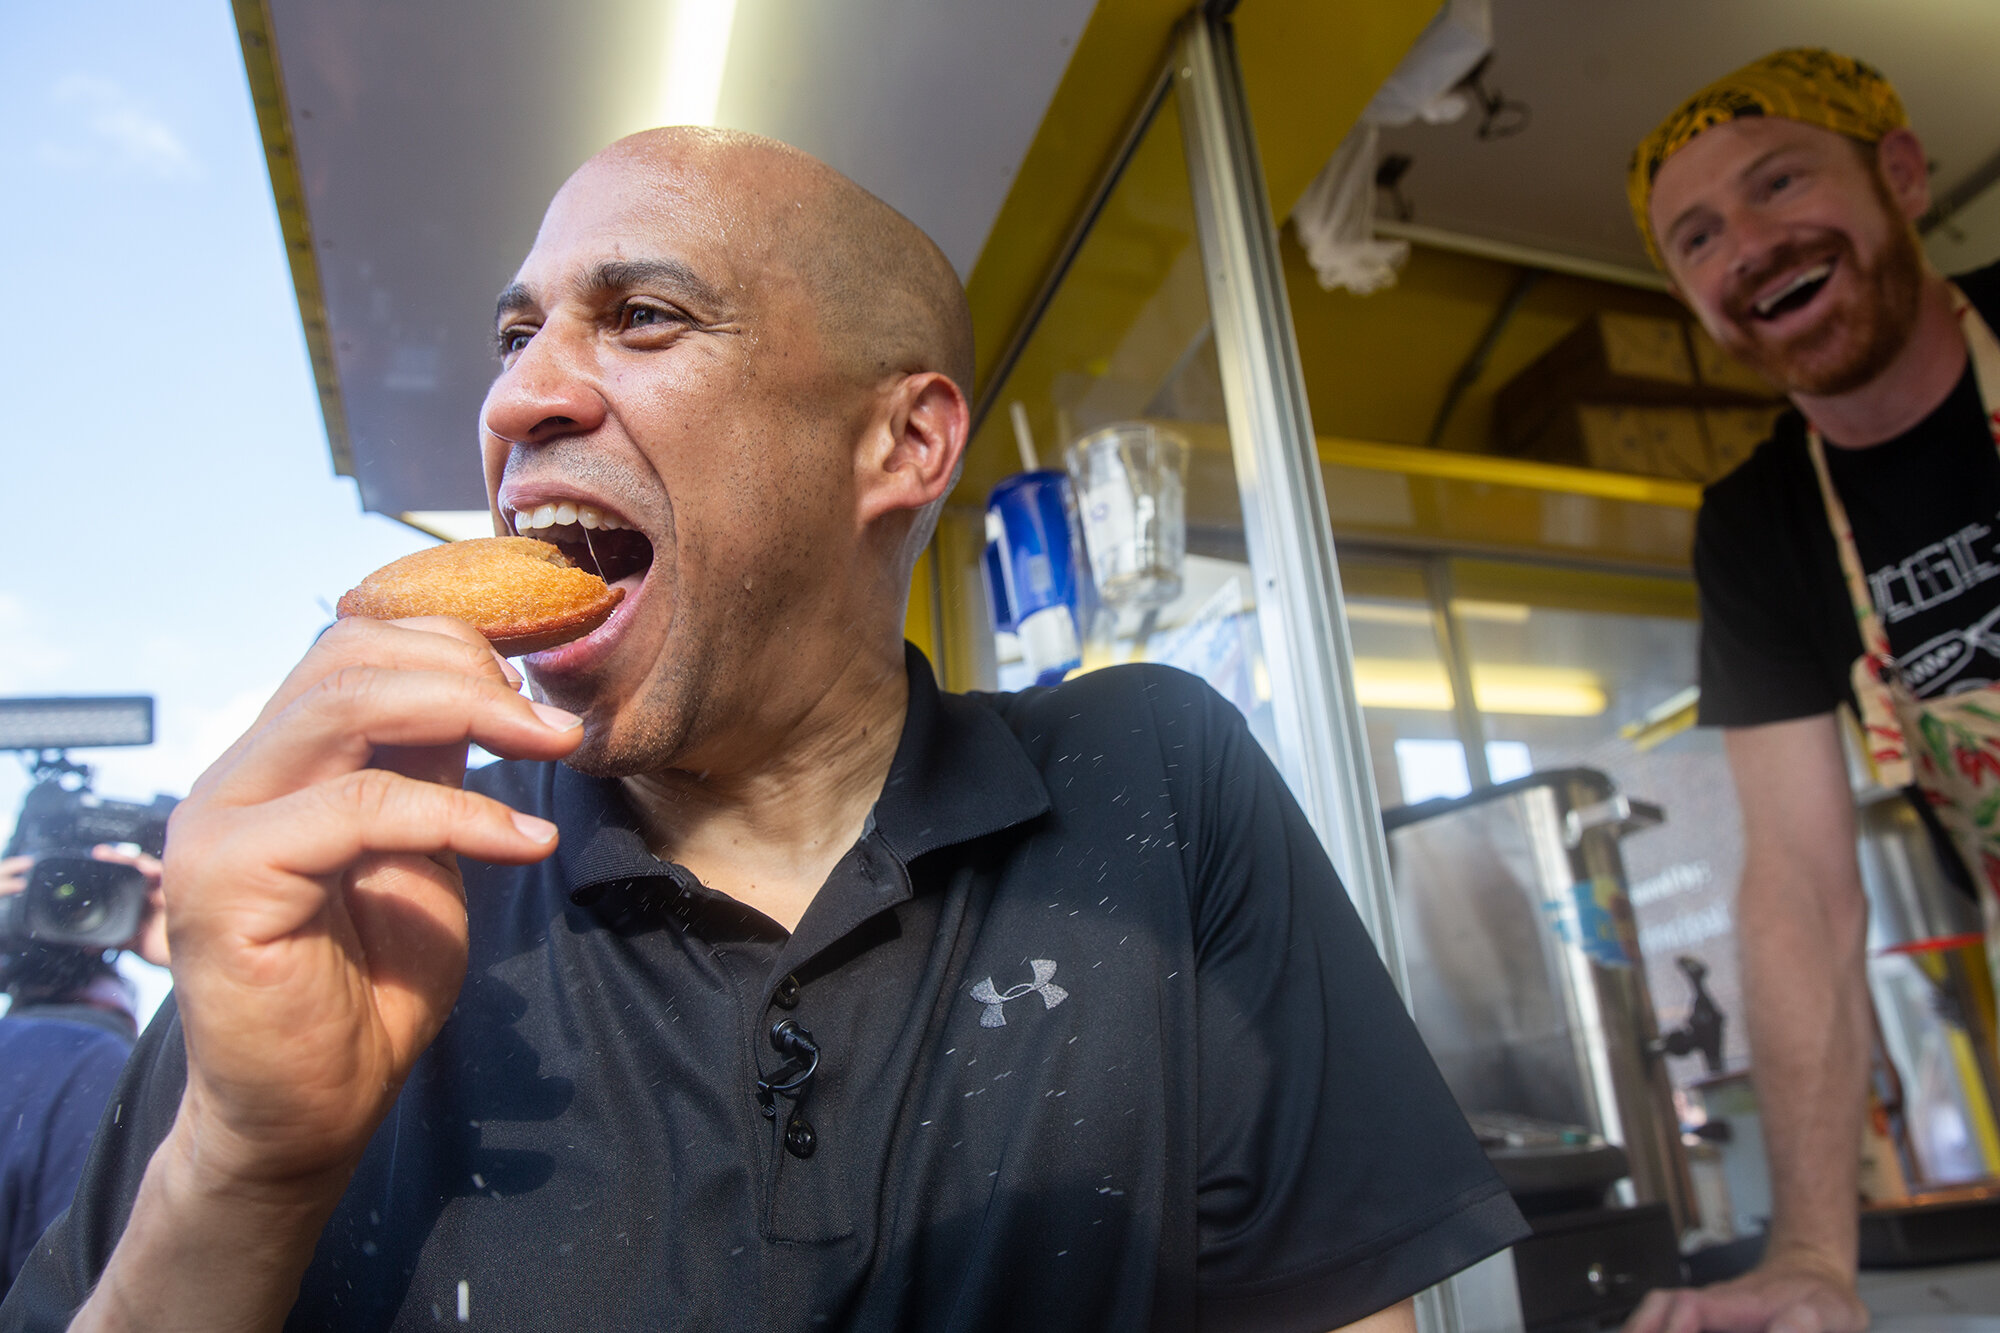  Sen. Cory Booker takes a bite out of a fried PB&amp;J on-a-stick at the Iowa State Fair on August 10, 2019 in Des Moines, Iowa. (For Buzzfeed News) 